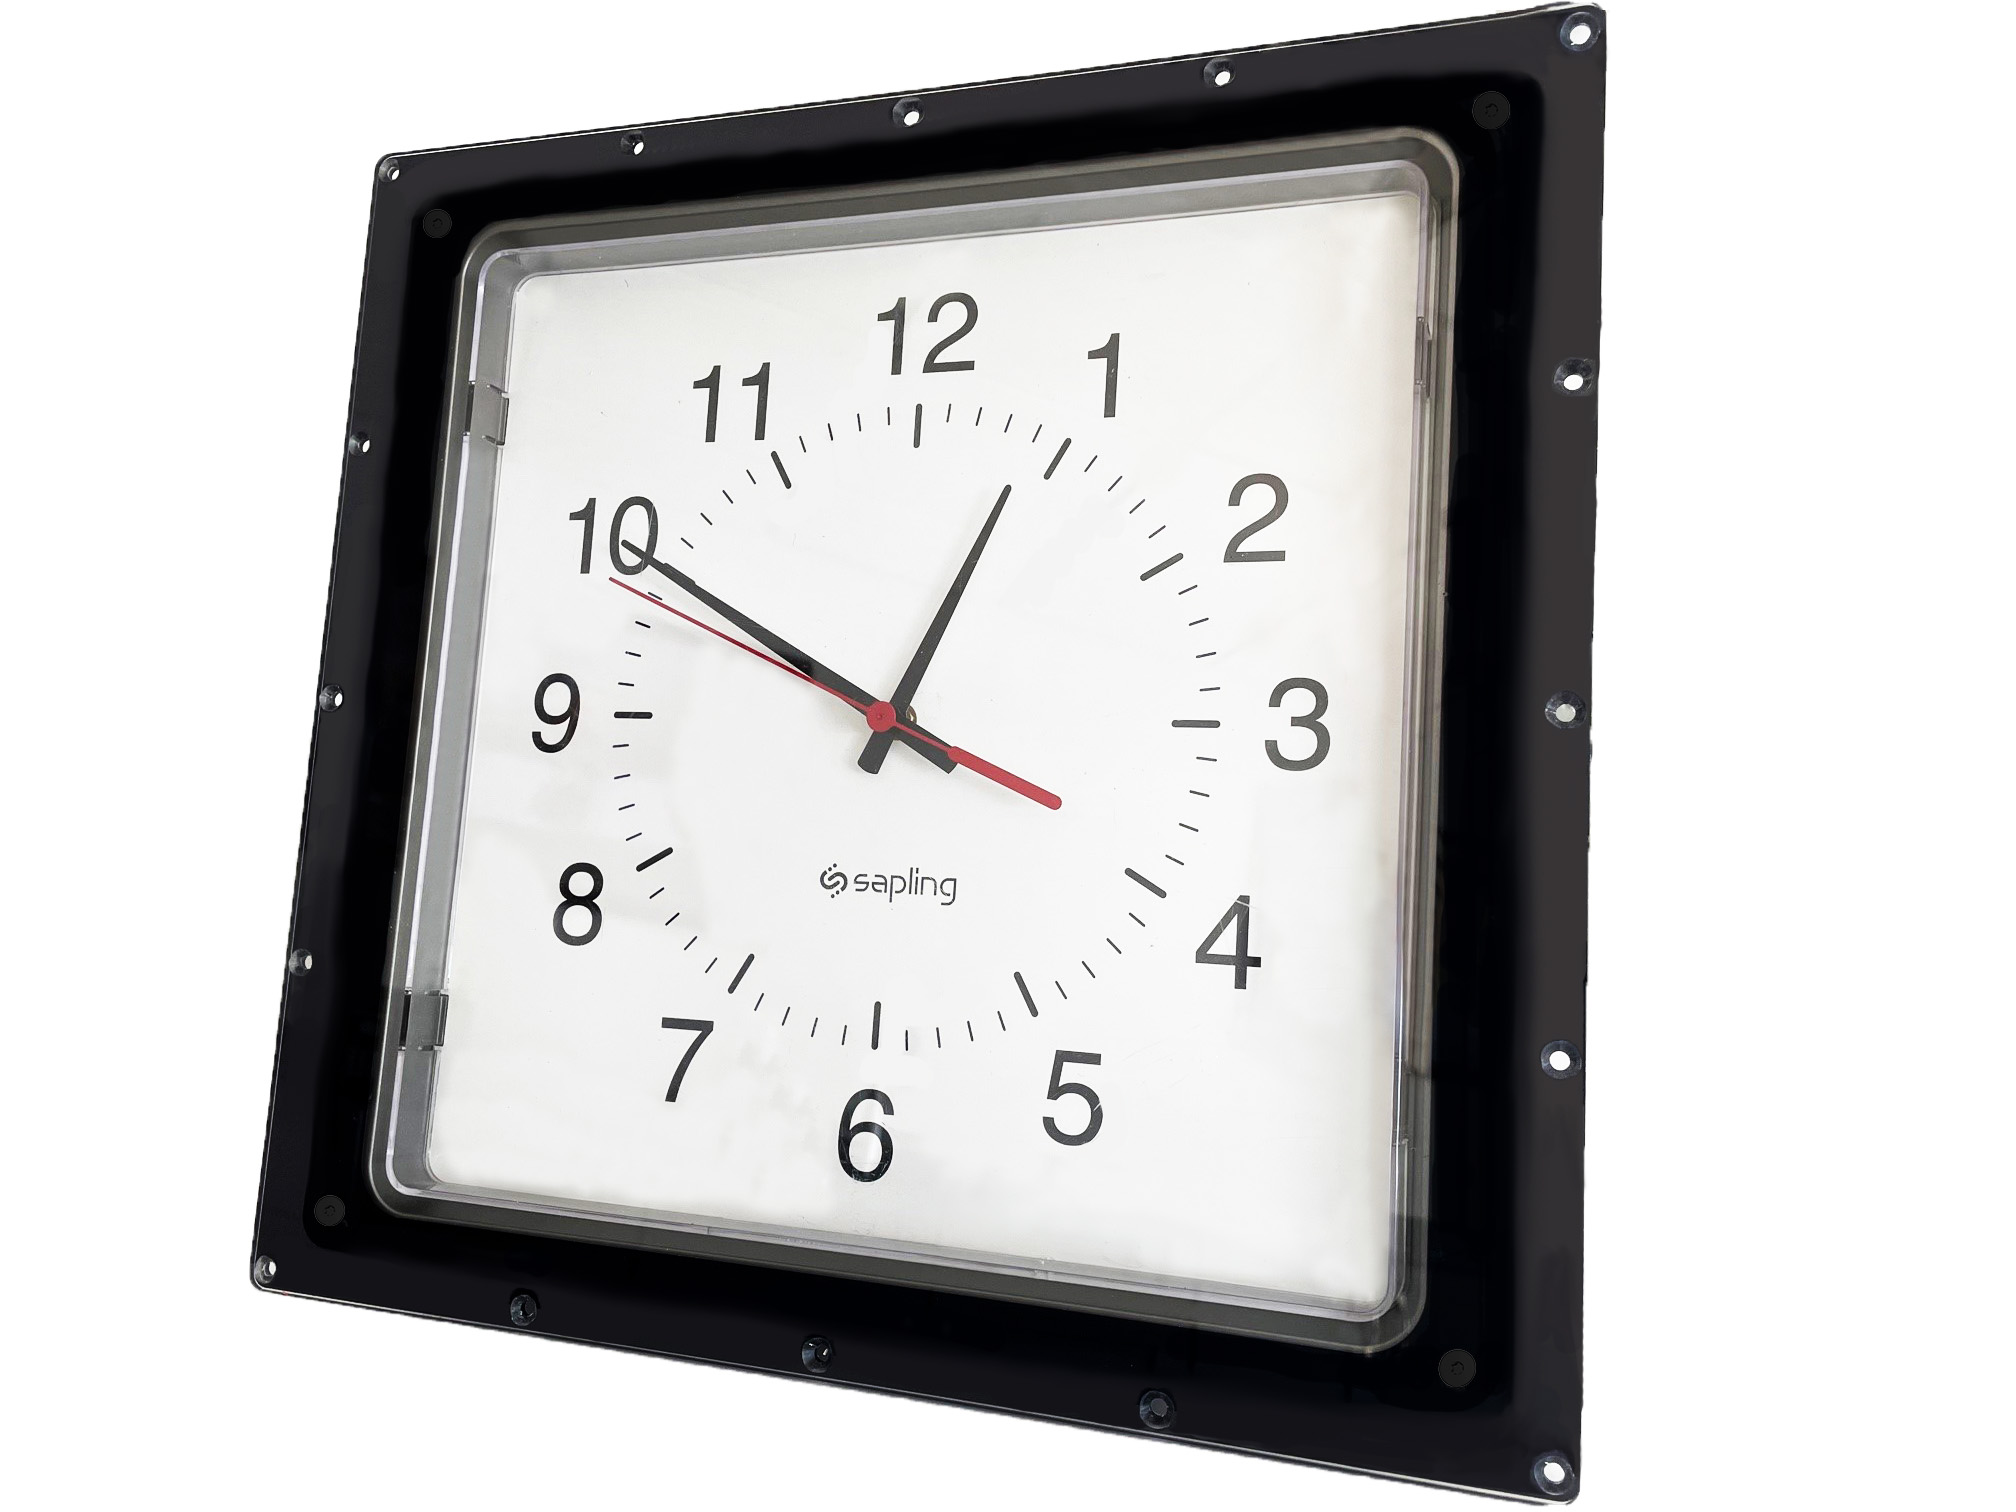 Sapling 12 Inch Analog Clock in a Flush Mounted Enclosure with a Polycarbonate Anti-Ligature Frame Design, Front View